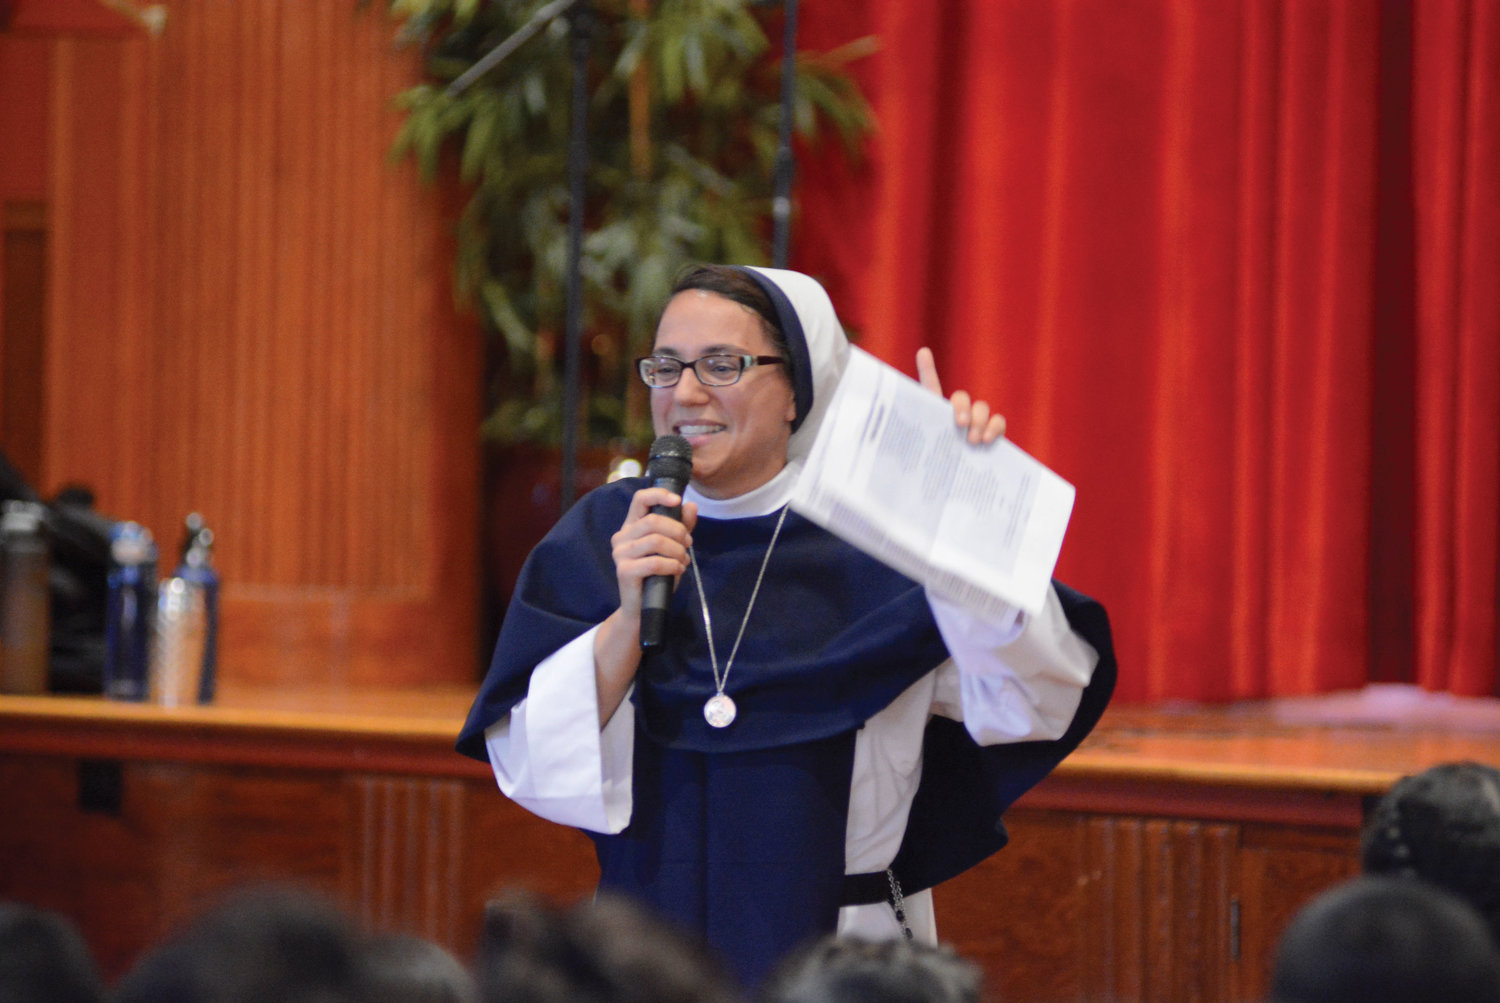 Sister Gianna Maria, S.V., tells her vocation story as a rap.